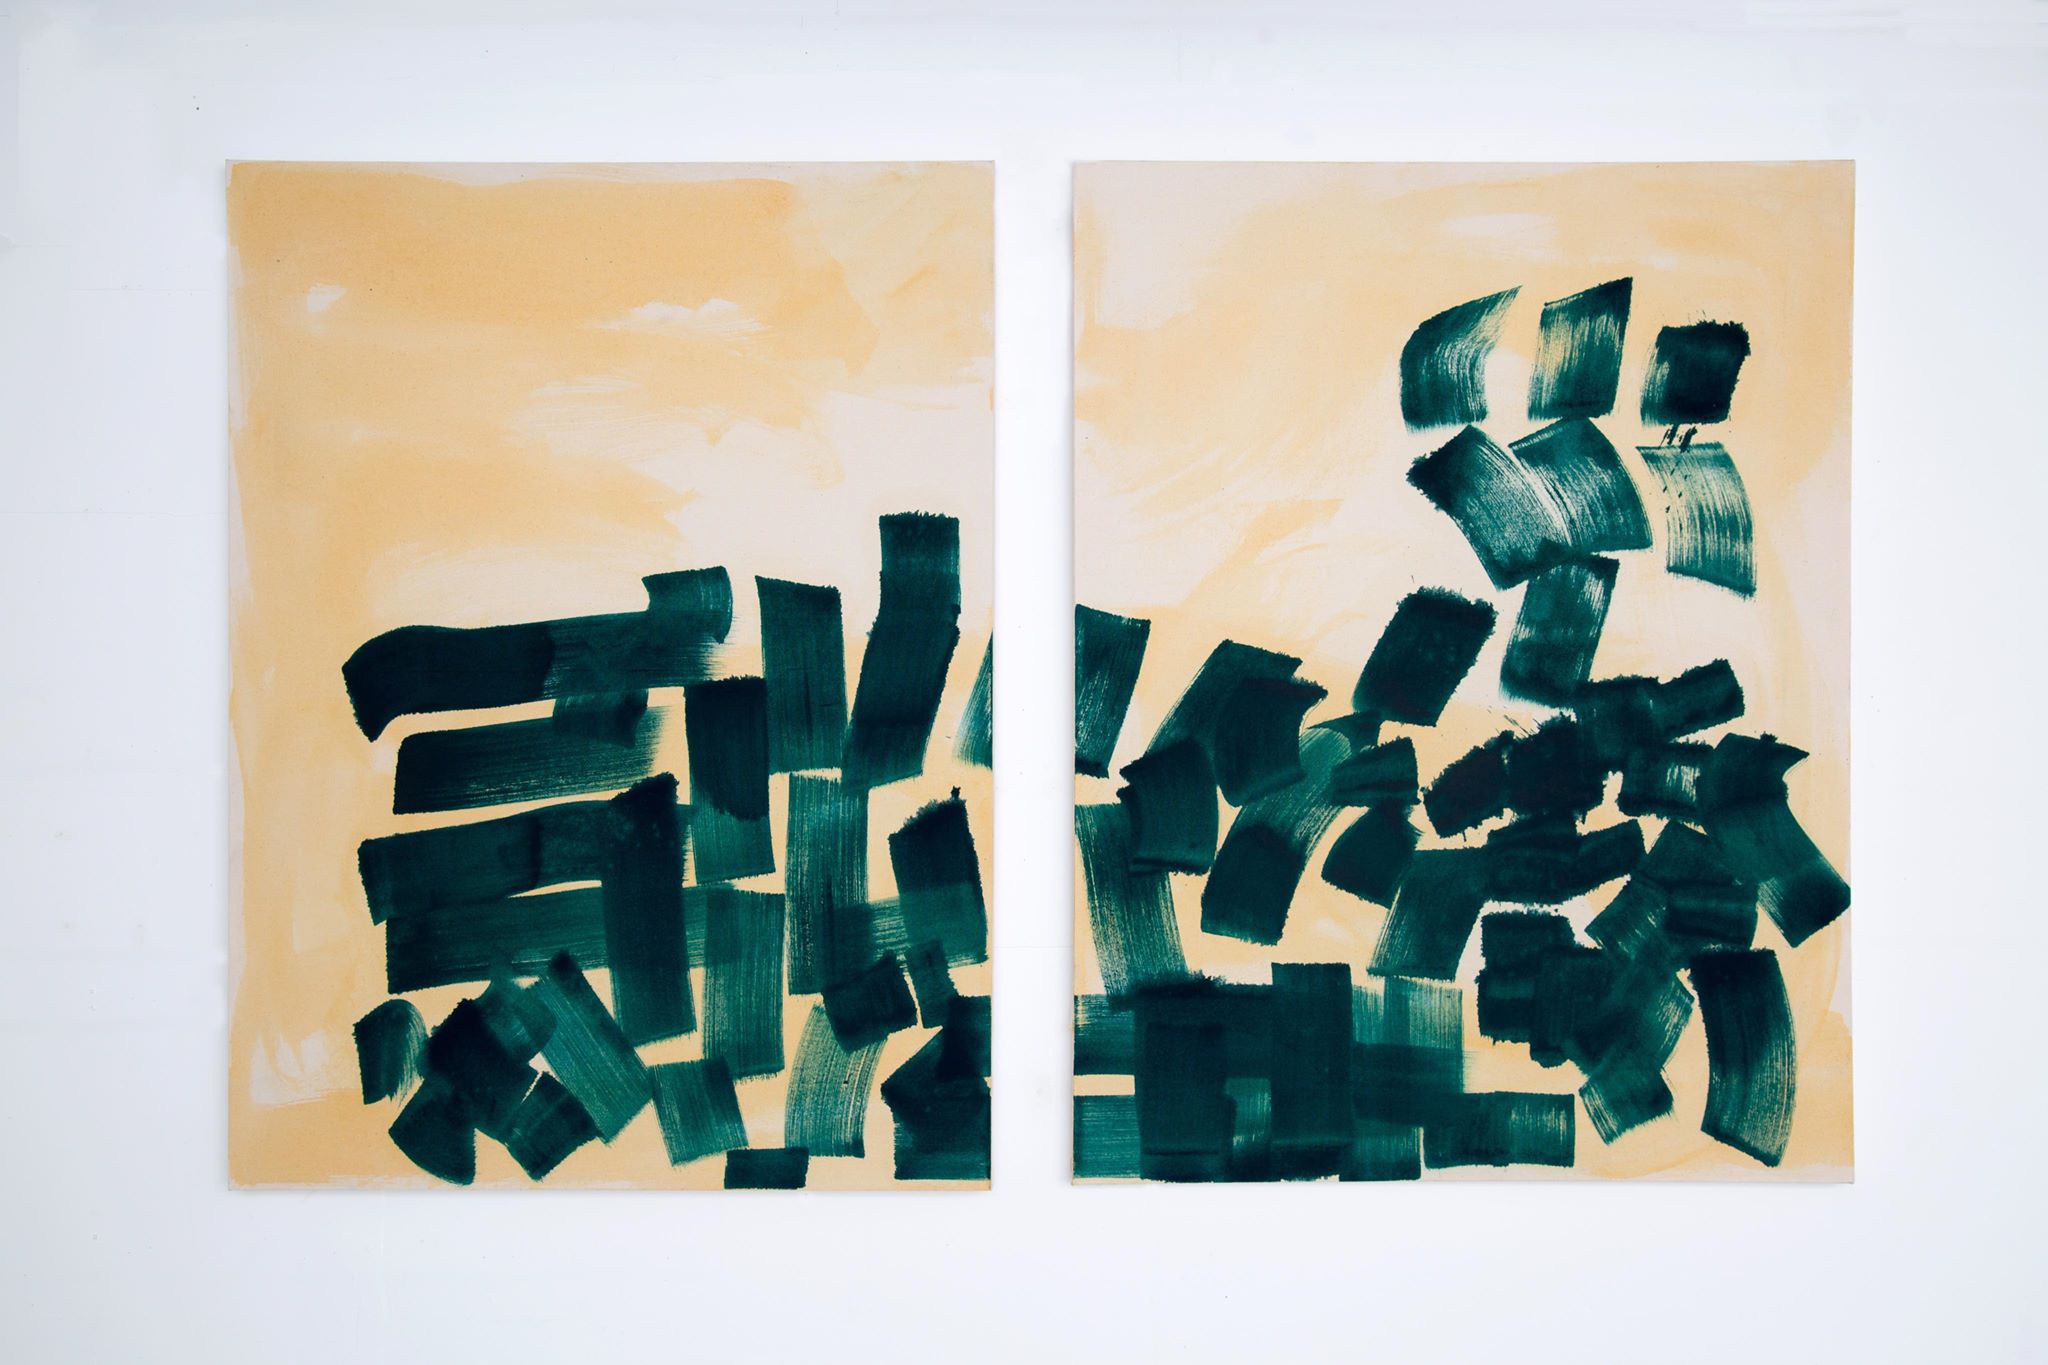 ‘Up in the Air’ 2020 120x100cm each Pigment and Medium on Canvas